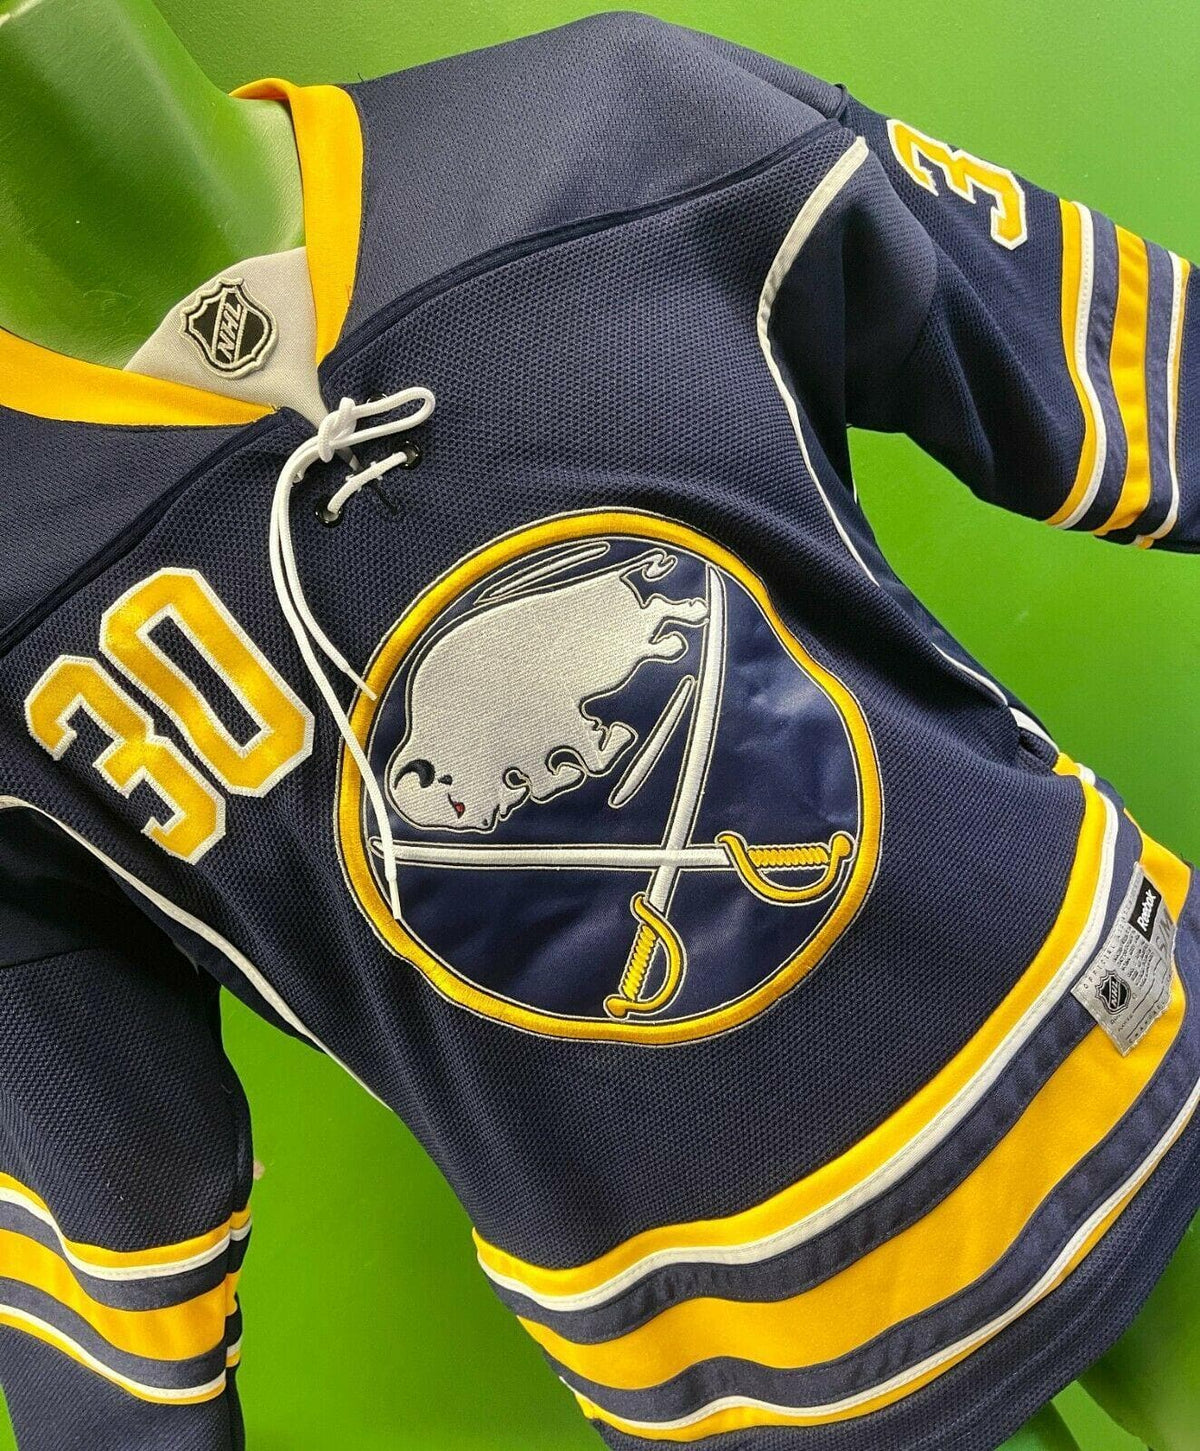 NHL Buffalo Sabres Miller #30 Reebok Stitched Jersey Youth S-M 6-12